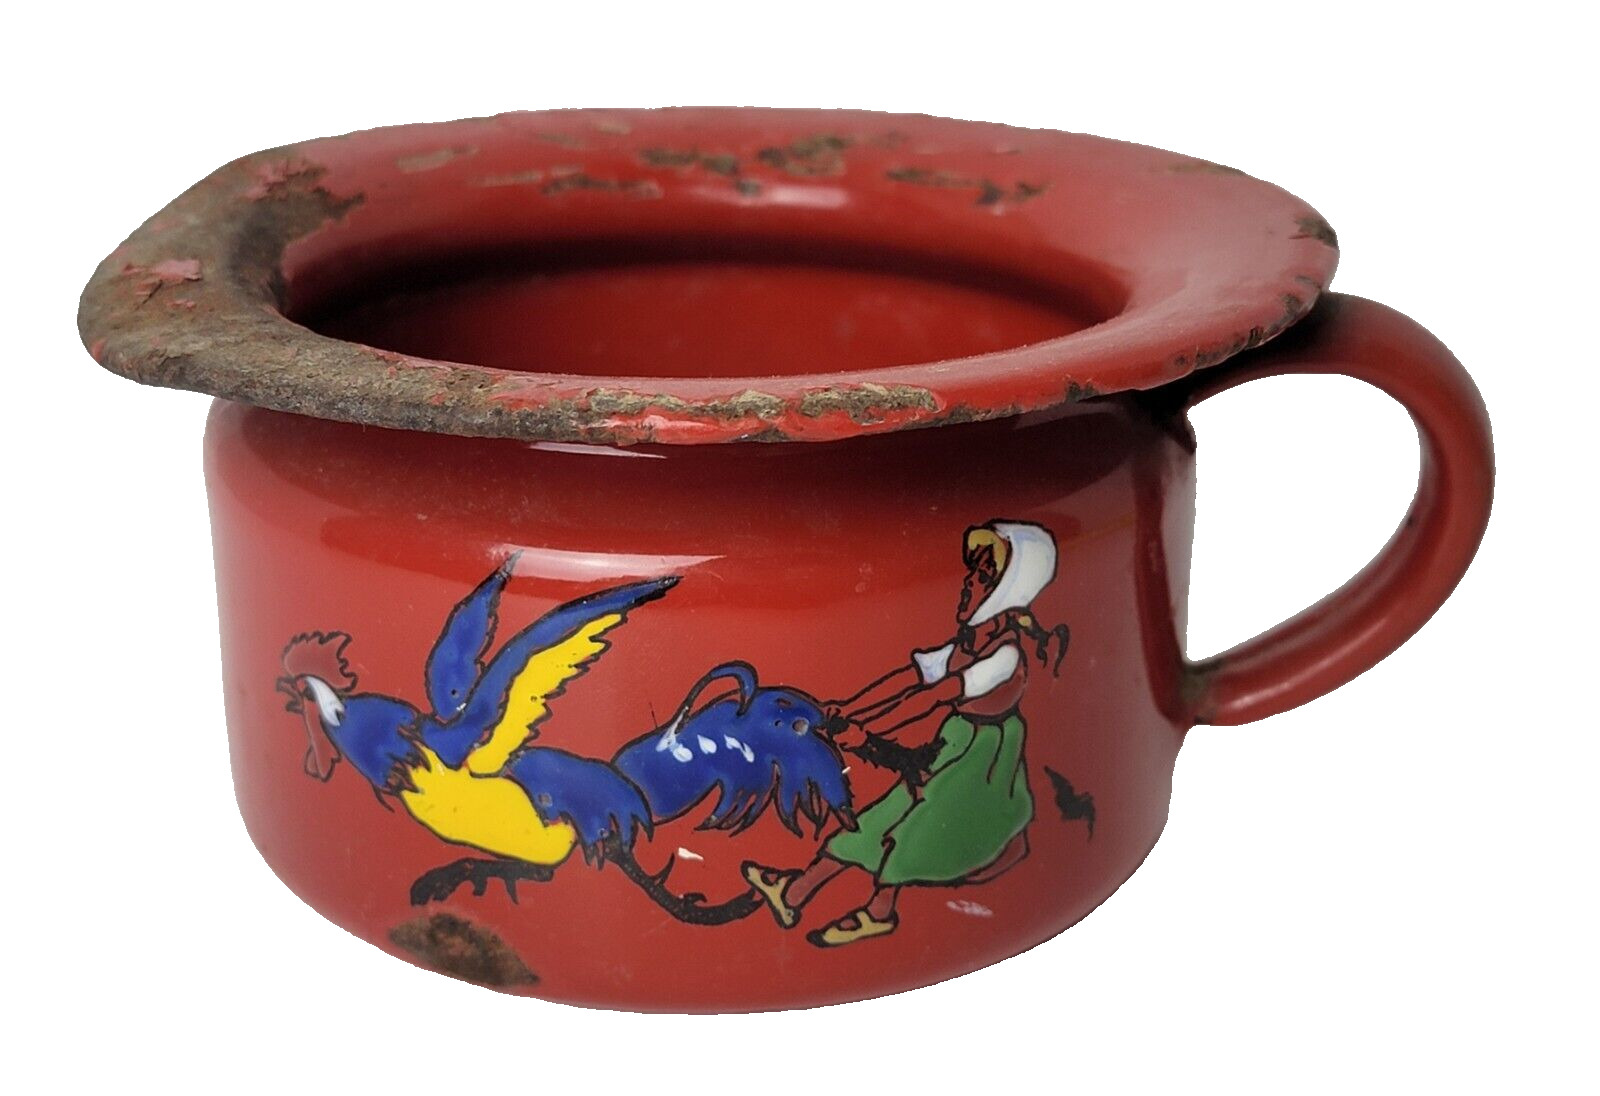 Vintage Red Enamel Metal Chamber Pot with Rooster and Woman